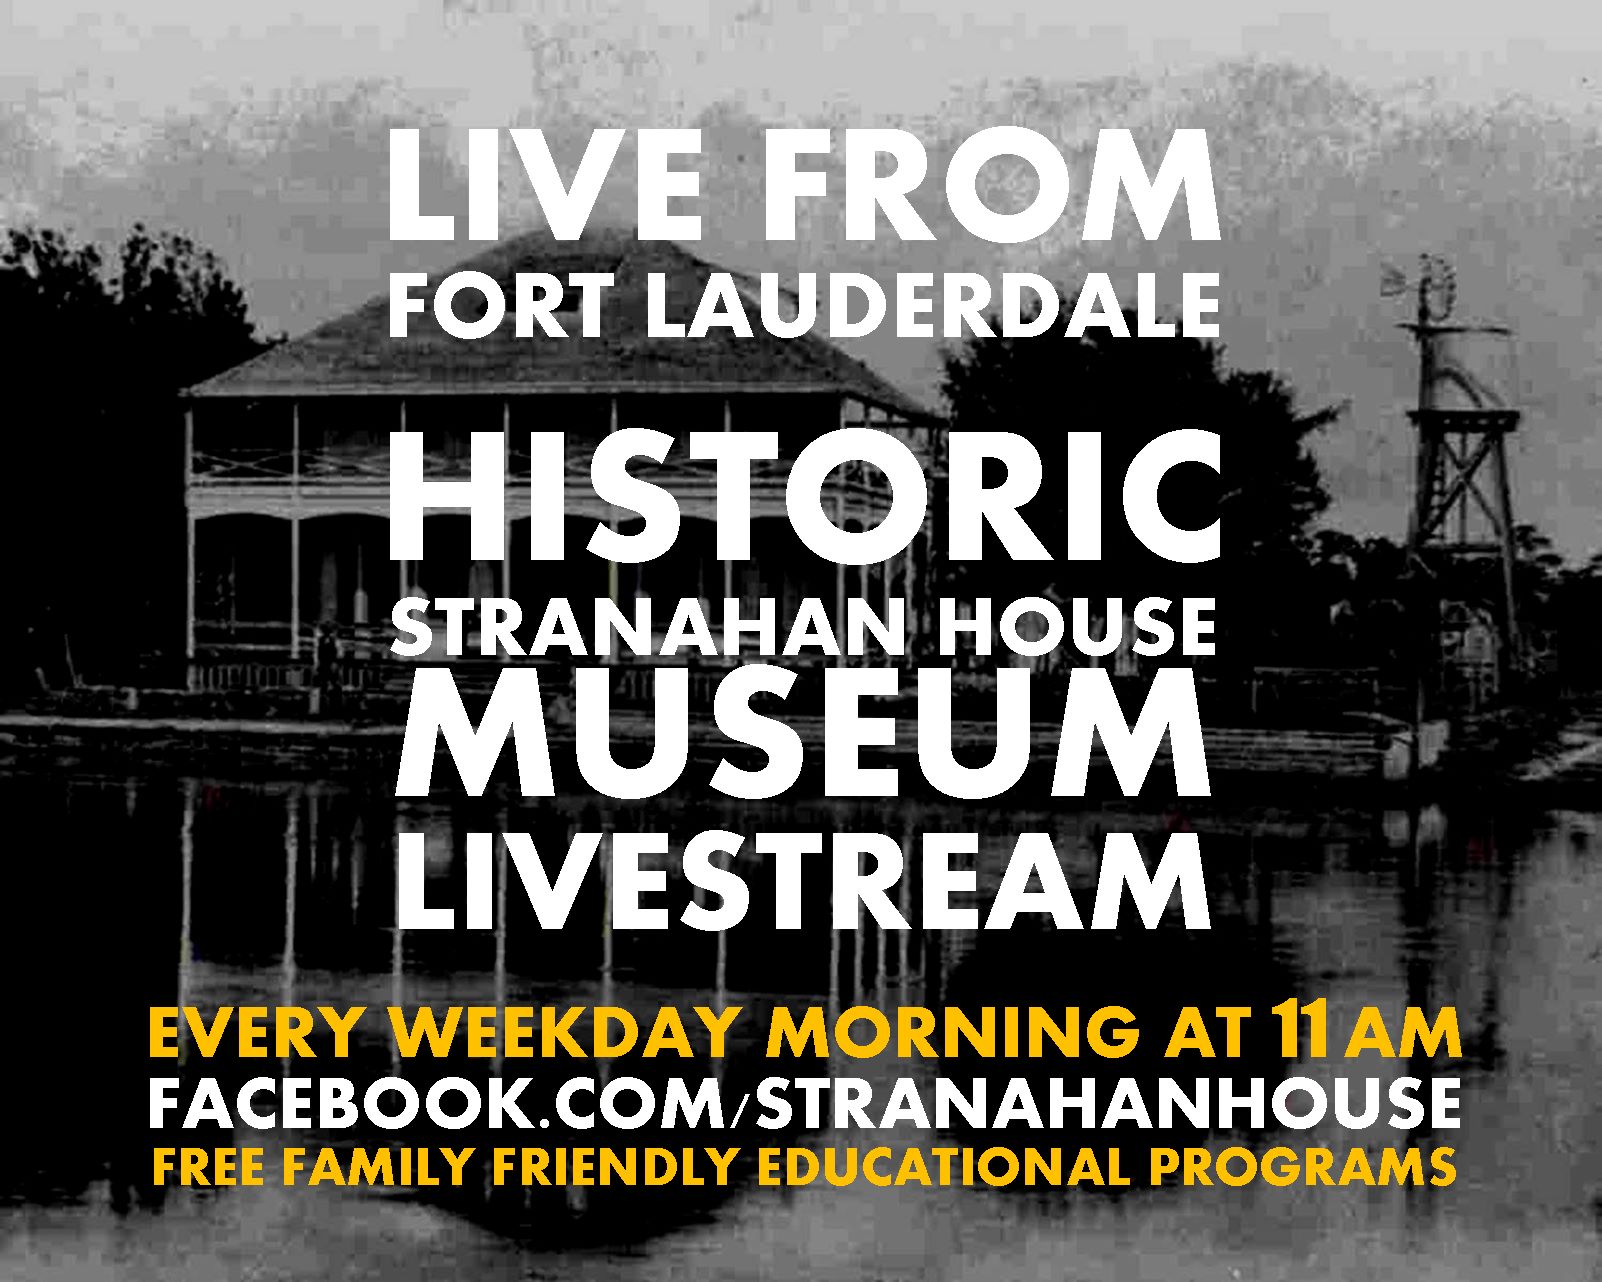 Live from Fort Lauderdale : Historic Stranahan House Museum Live Stream